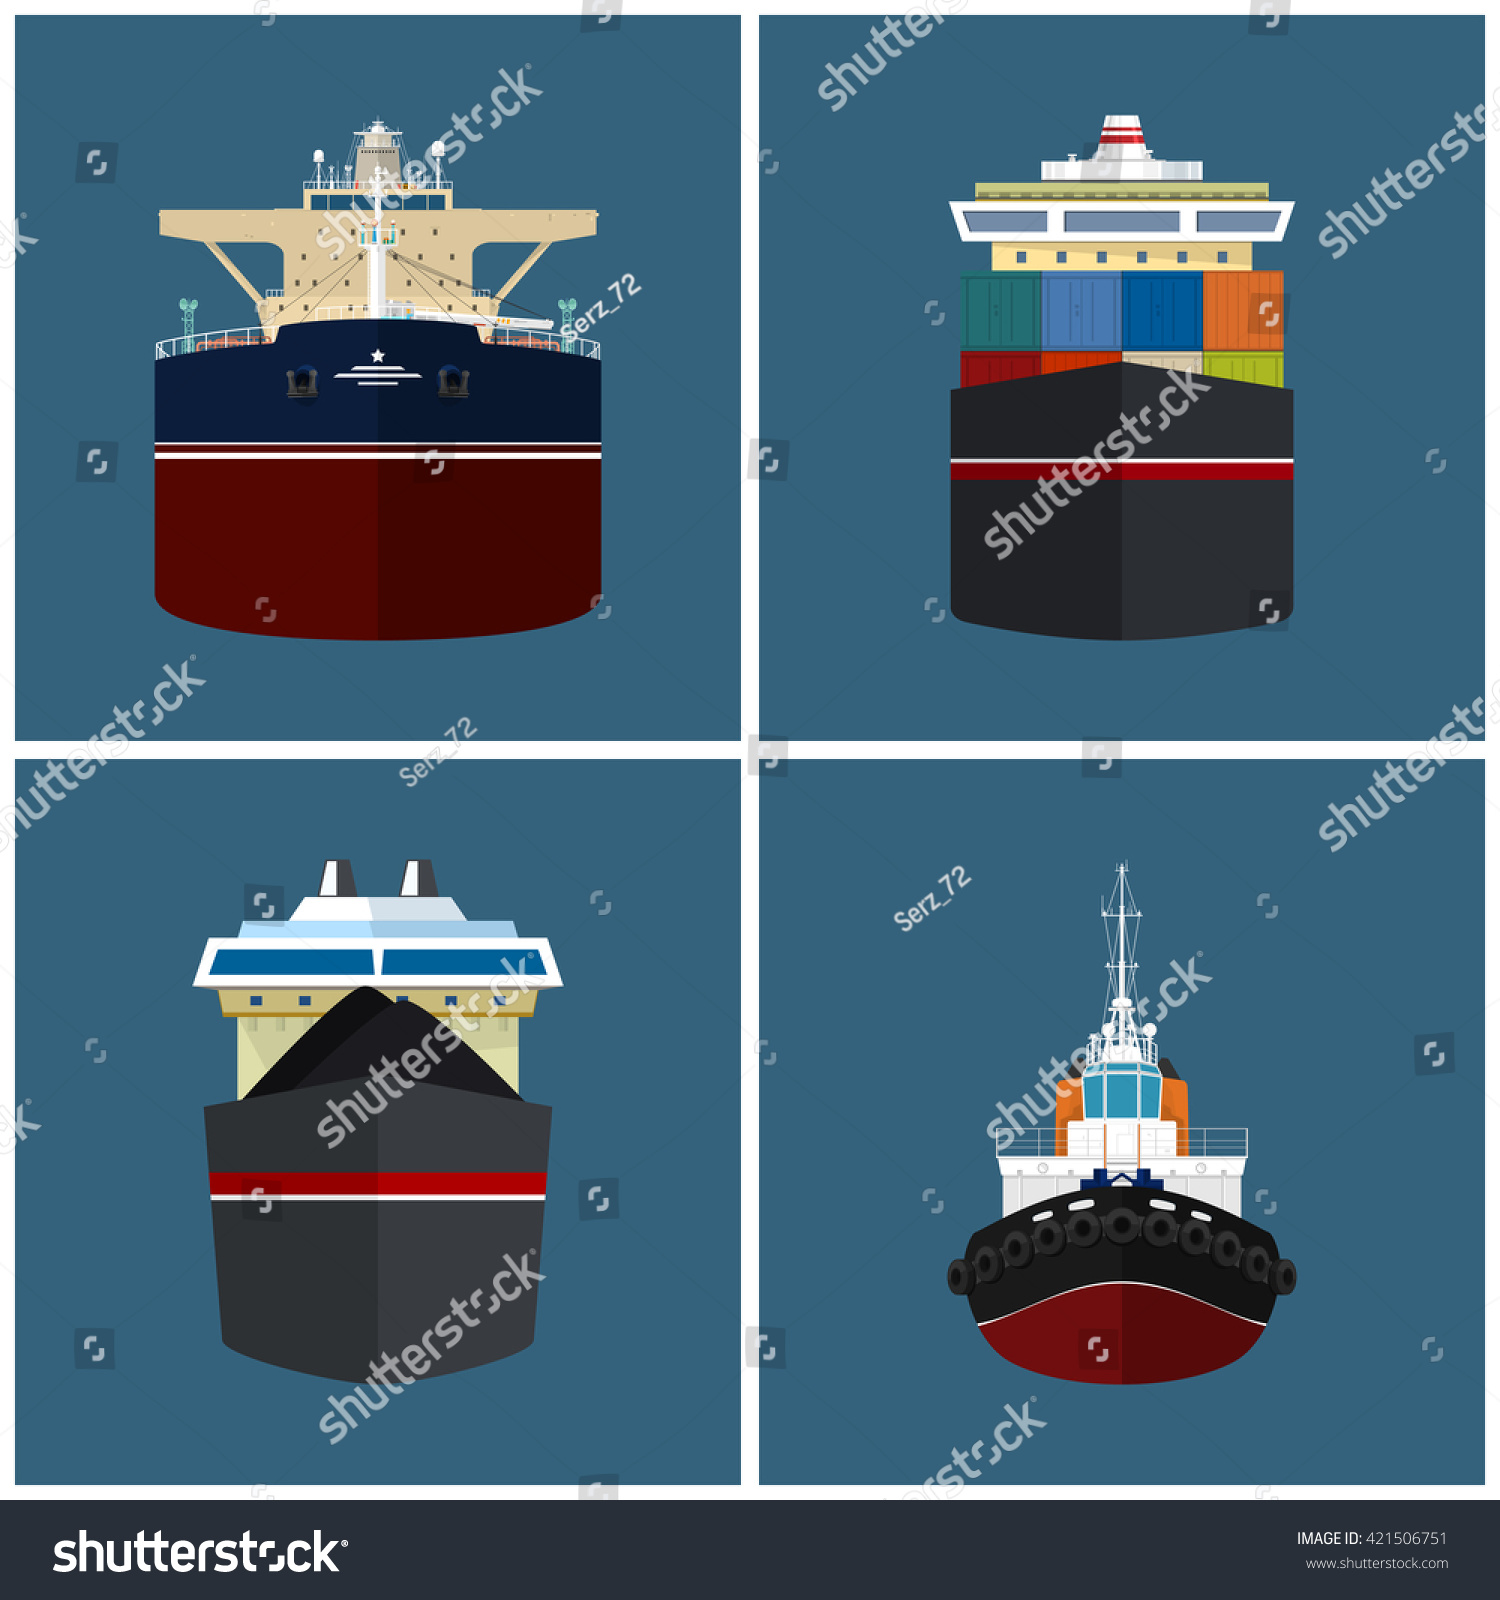 SVG of Front View of the Vessel, Cargo Container Ship, Oil Tanker, Dry Cargo Ship, Tugboat,   International Freight Transportation, Vessel for the Transportation of Goods,  Vector Illustration svg